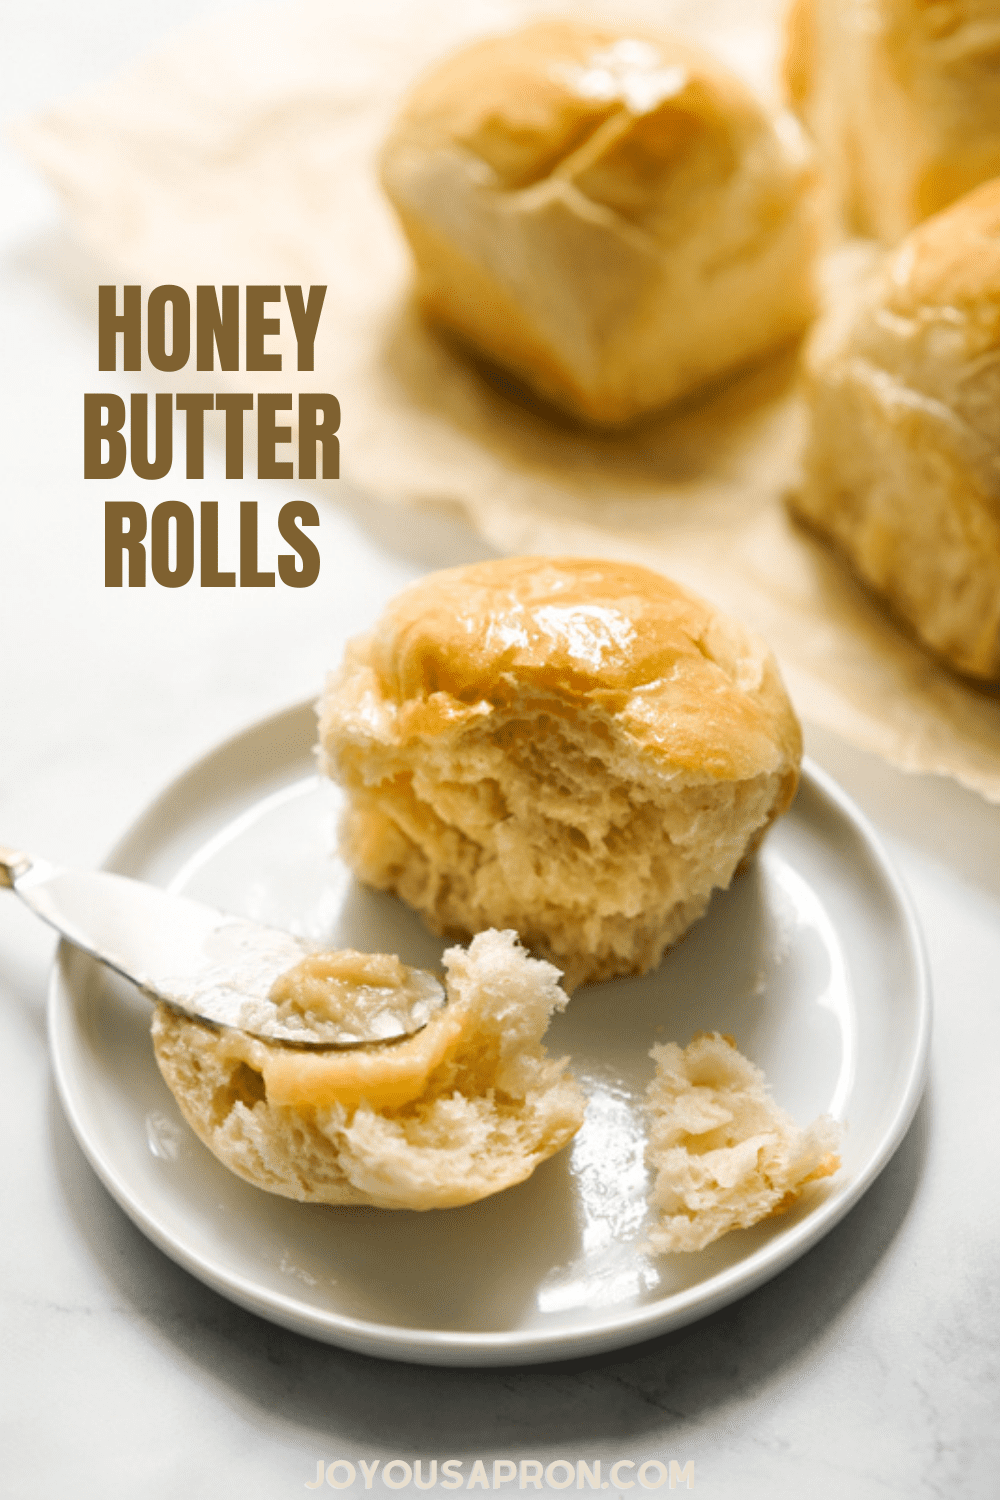 Honey Butter Rolls - these pull apart dinner yeast rolls are soft and fluffy, fresh and warm, topped with a sticky sweet and savory honey butter compound mixture. via @joyousapron